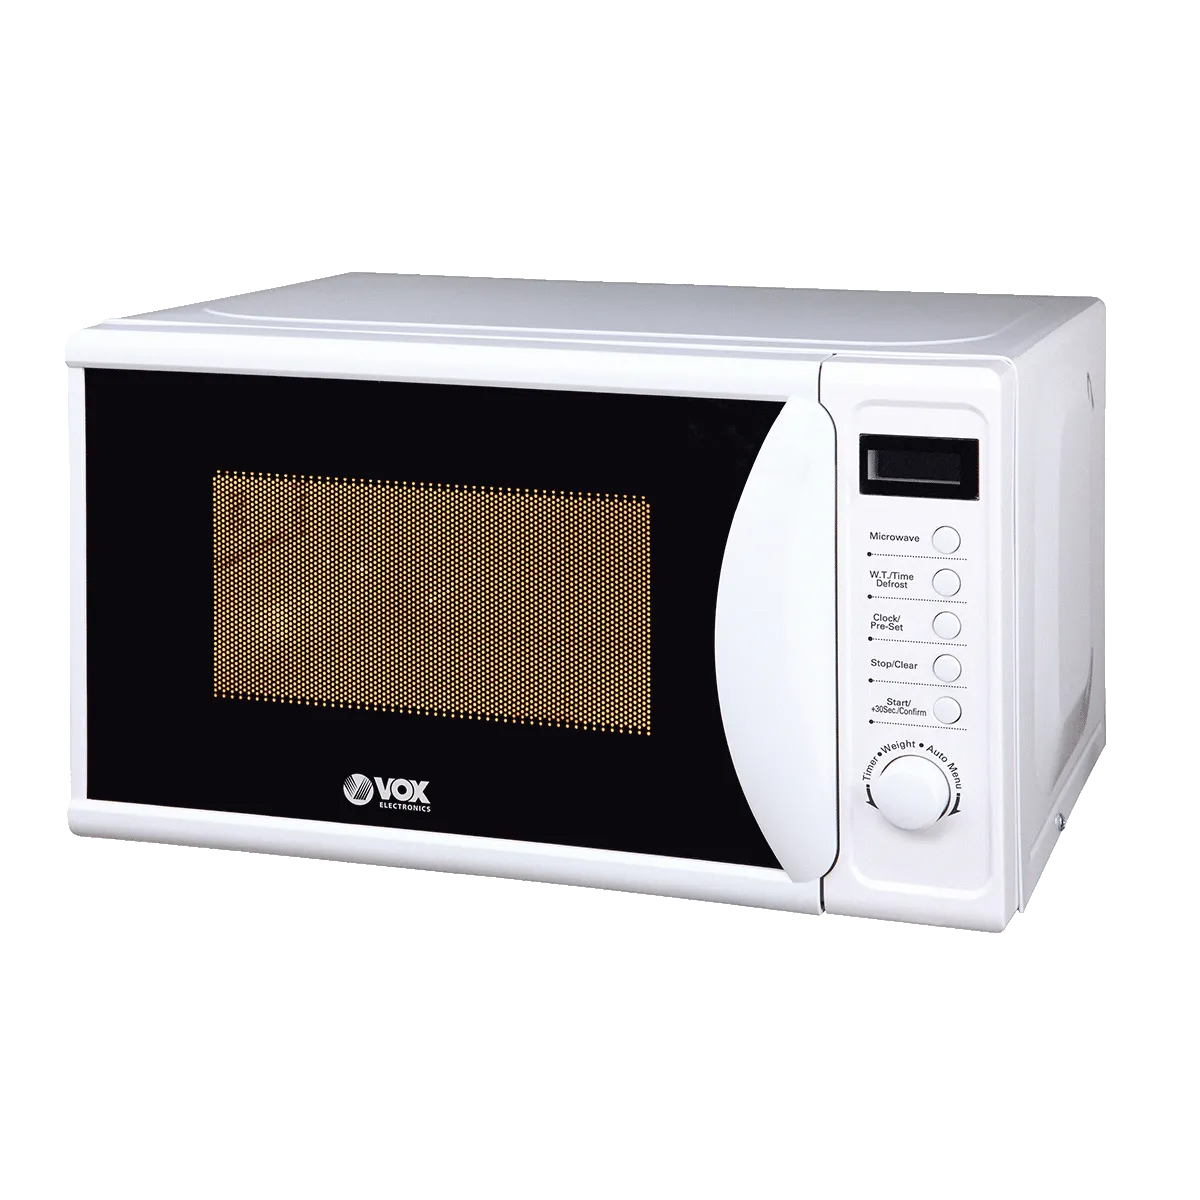 Built-in microwave oven MWH-MD20 